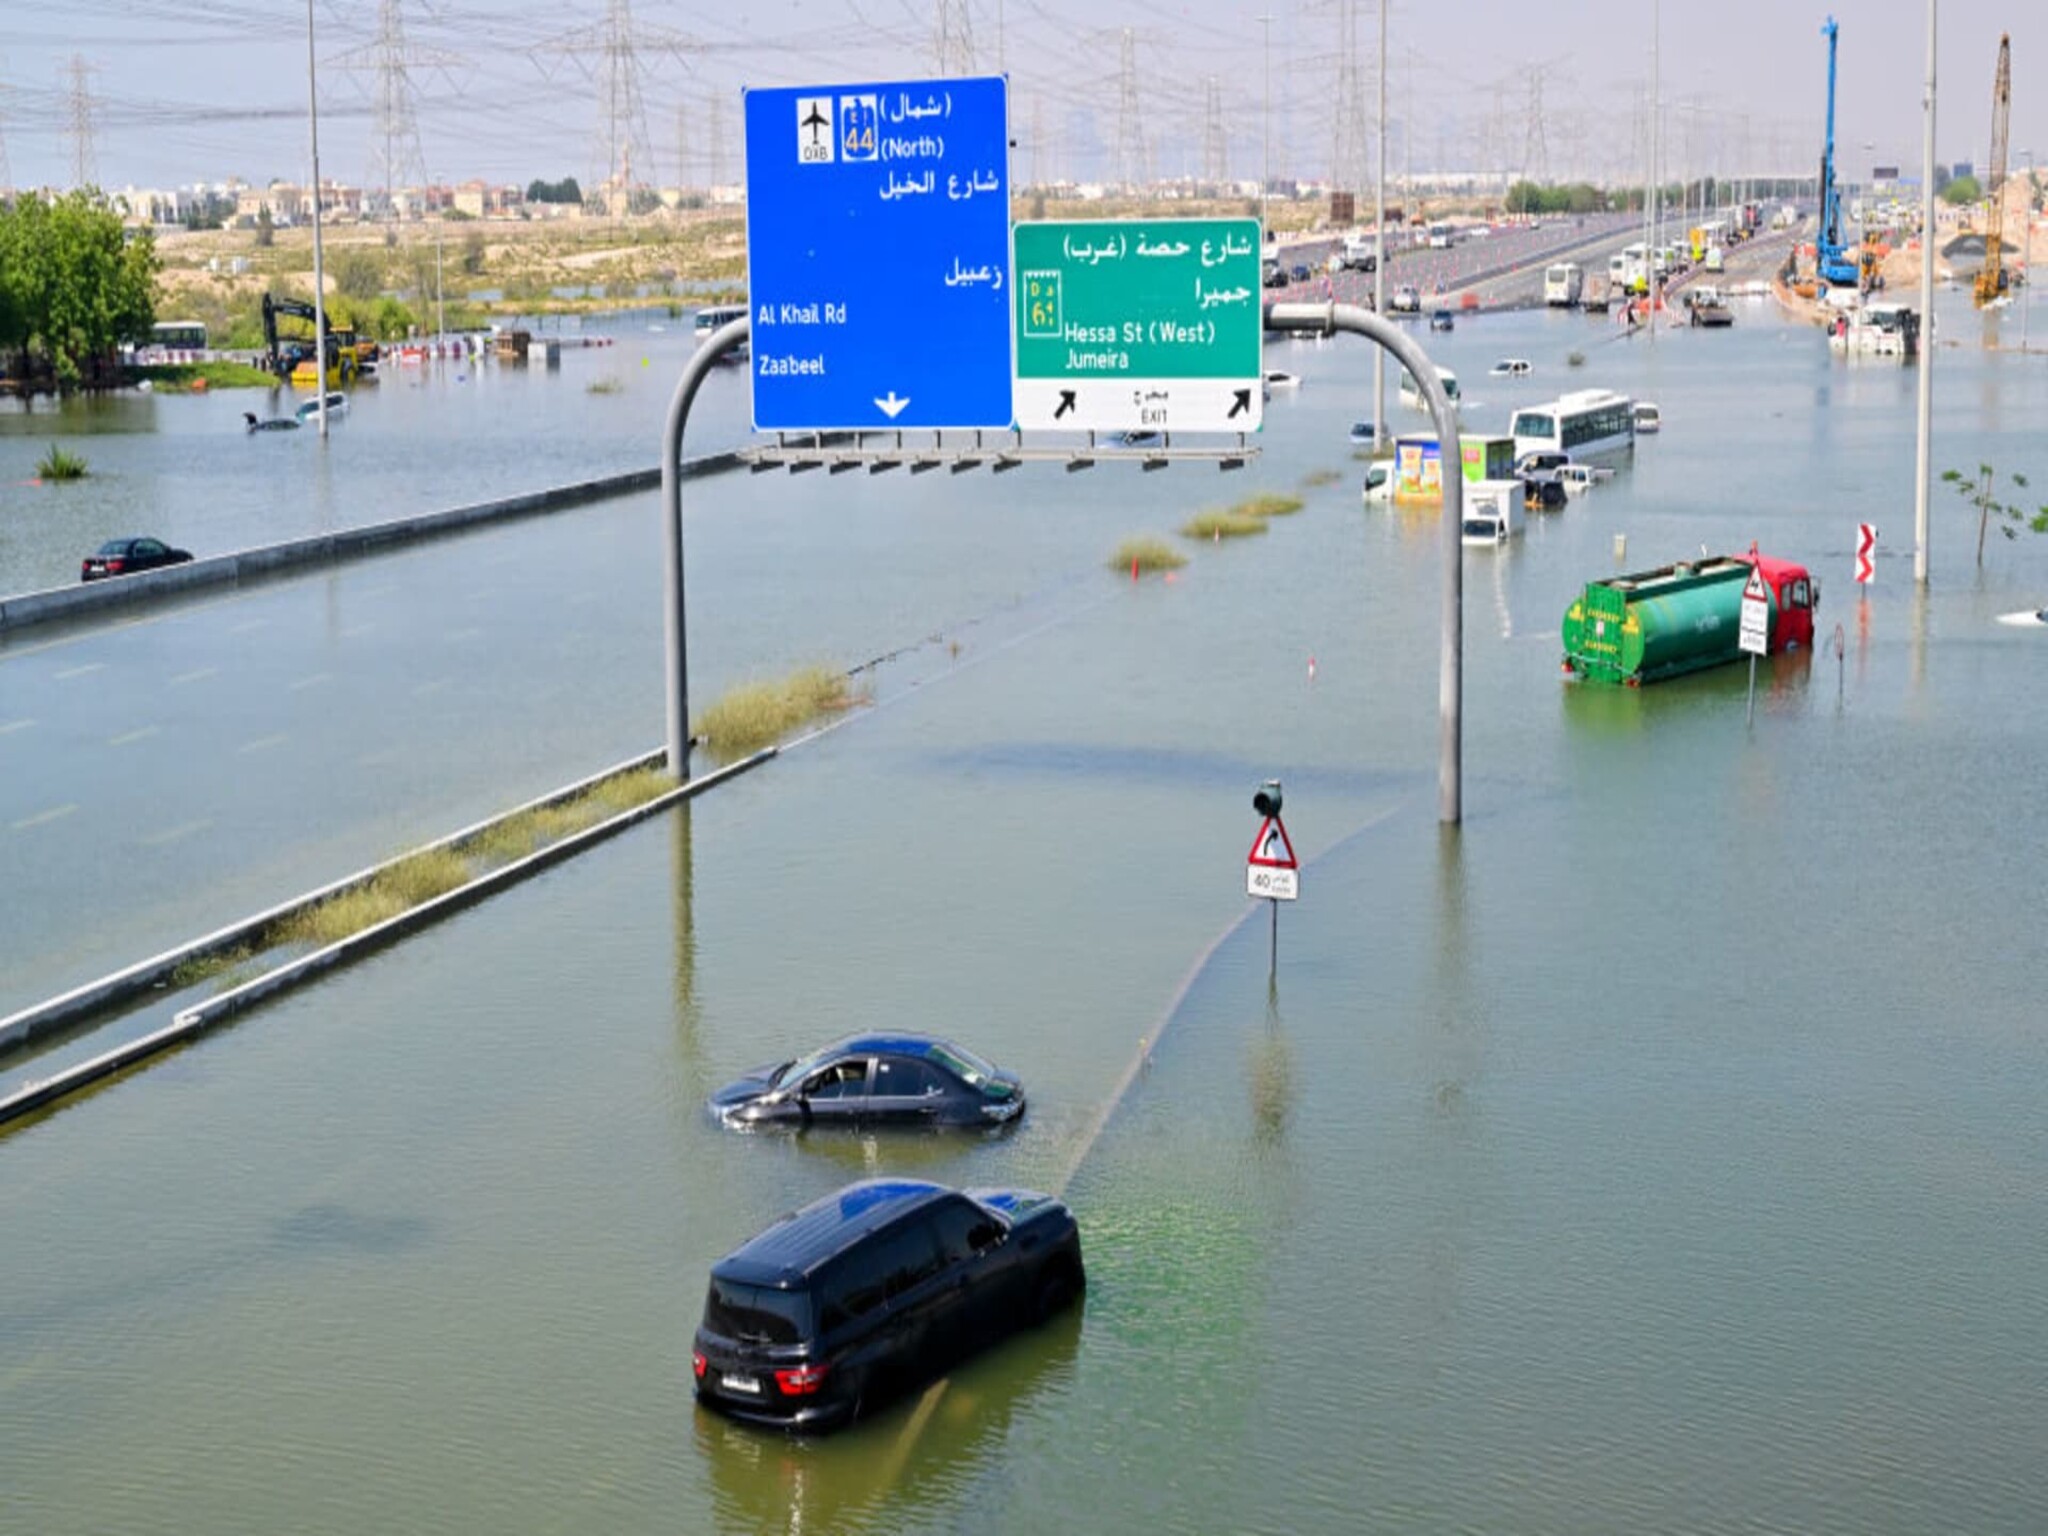 Dubai introduces Interest-free loans for some businesses affected by heavy rains